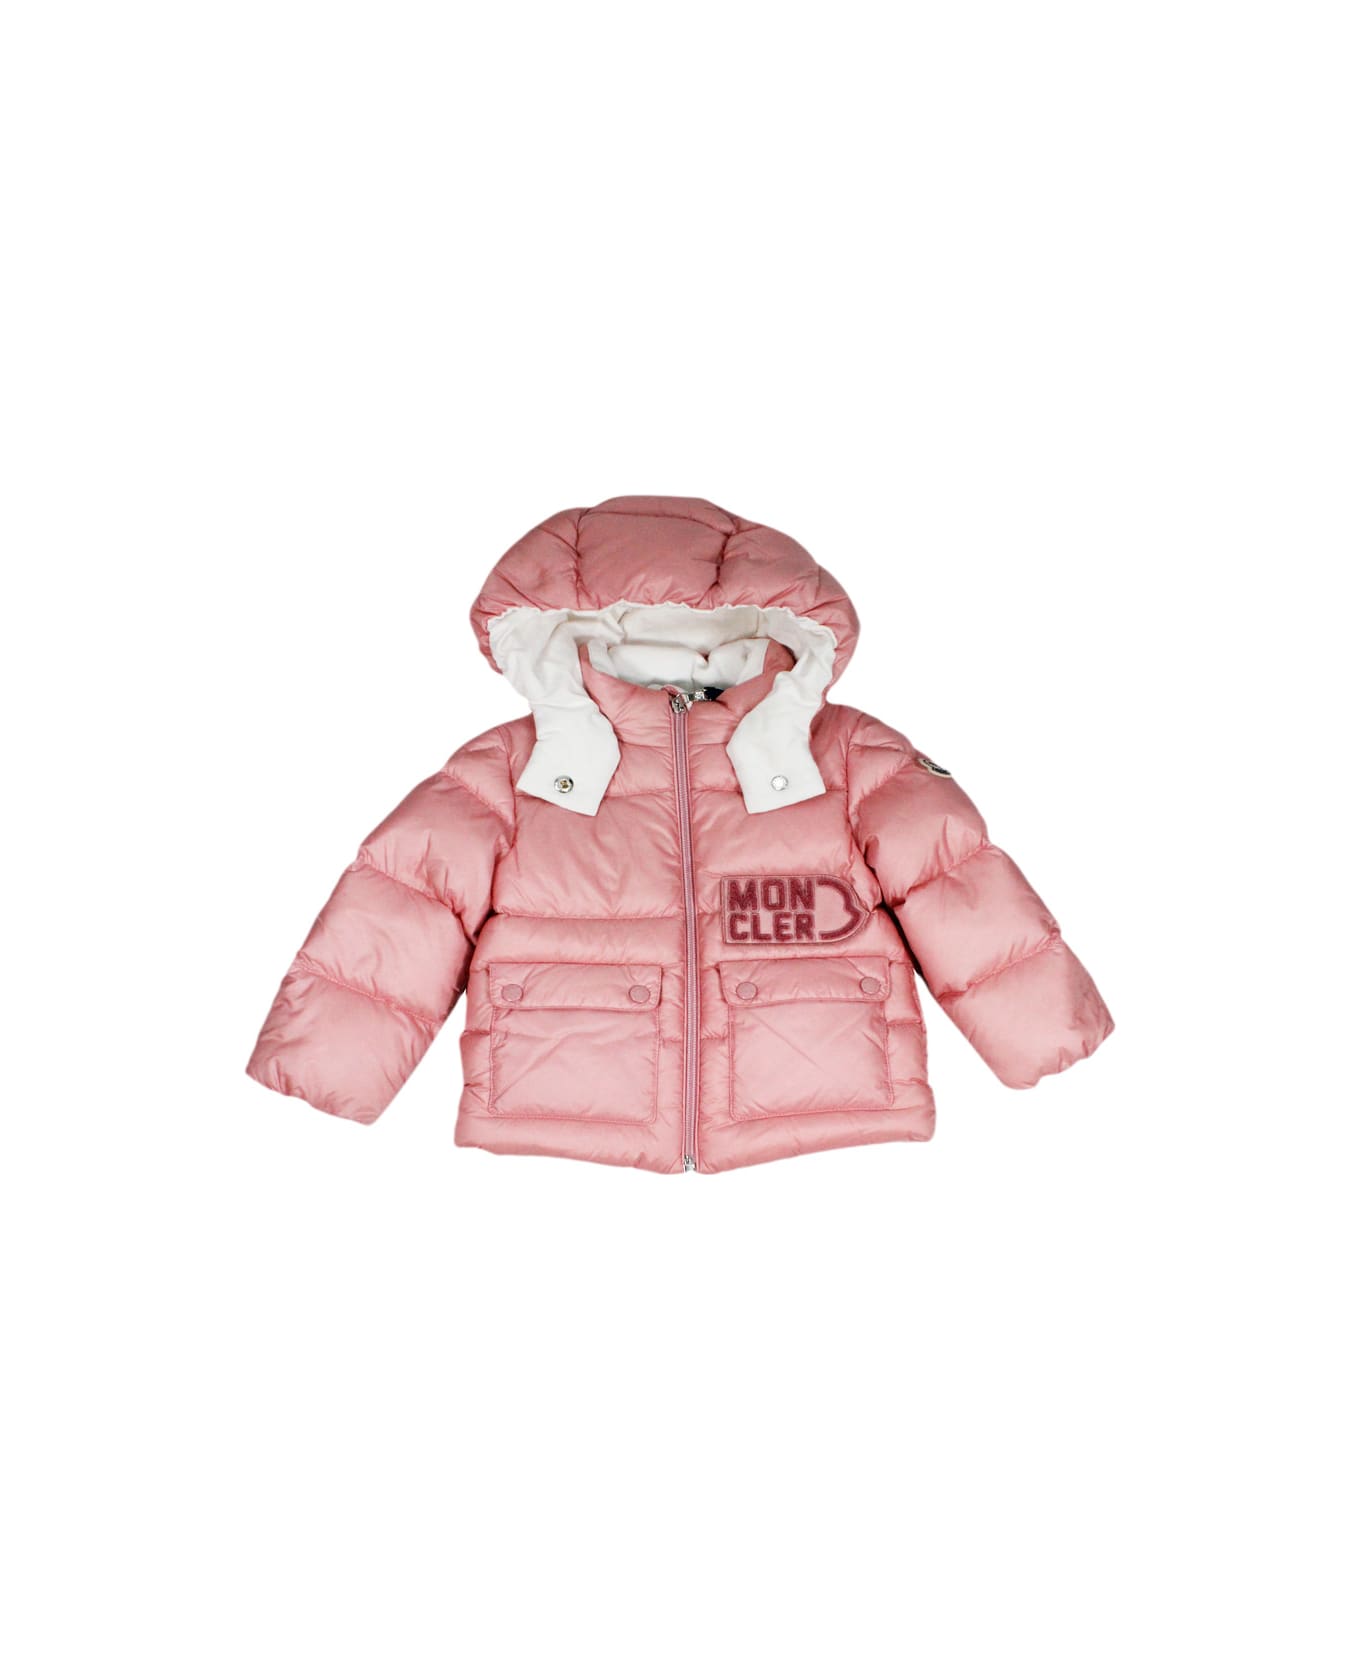 Moncler Abbaye Down Jacket Padded With Real Goose Down With Detachable Hood, Zip Closure And Pockets On The Front - Pink